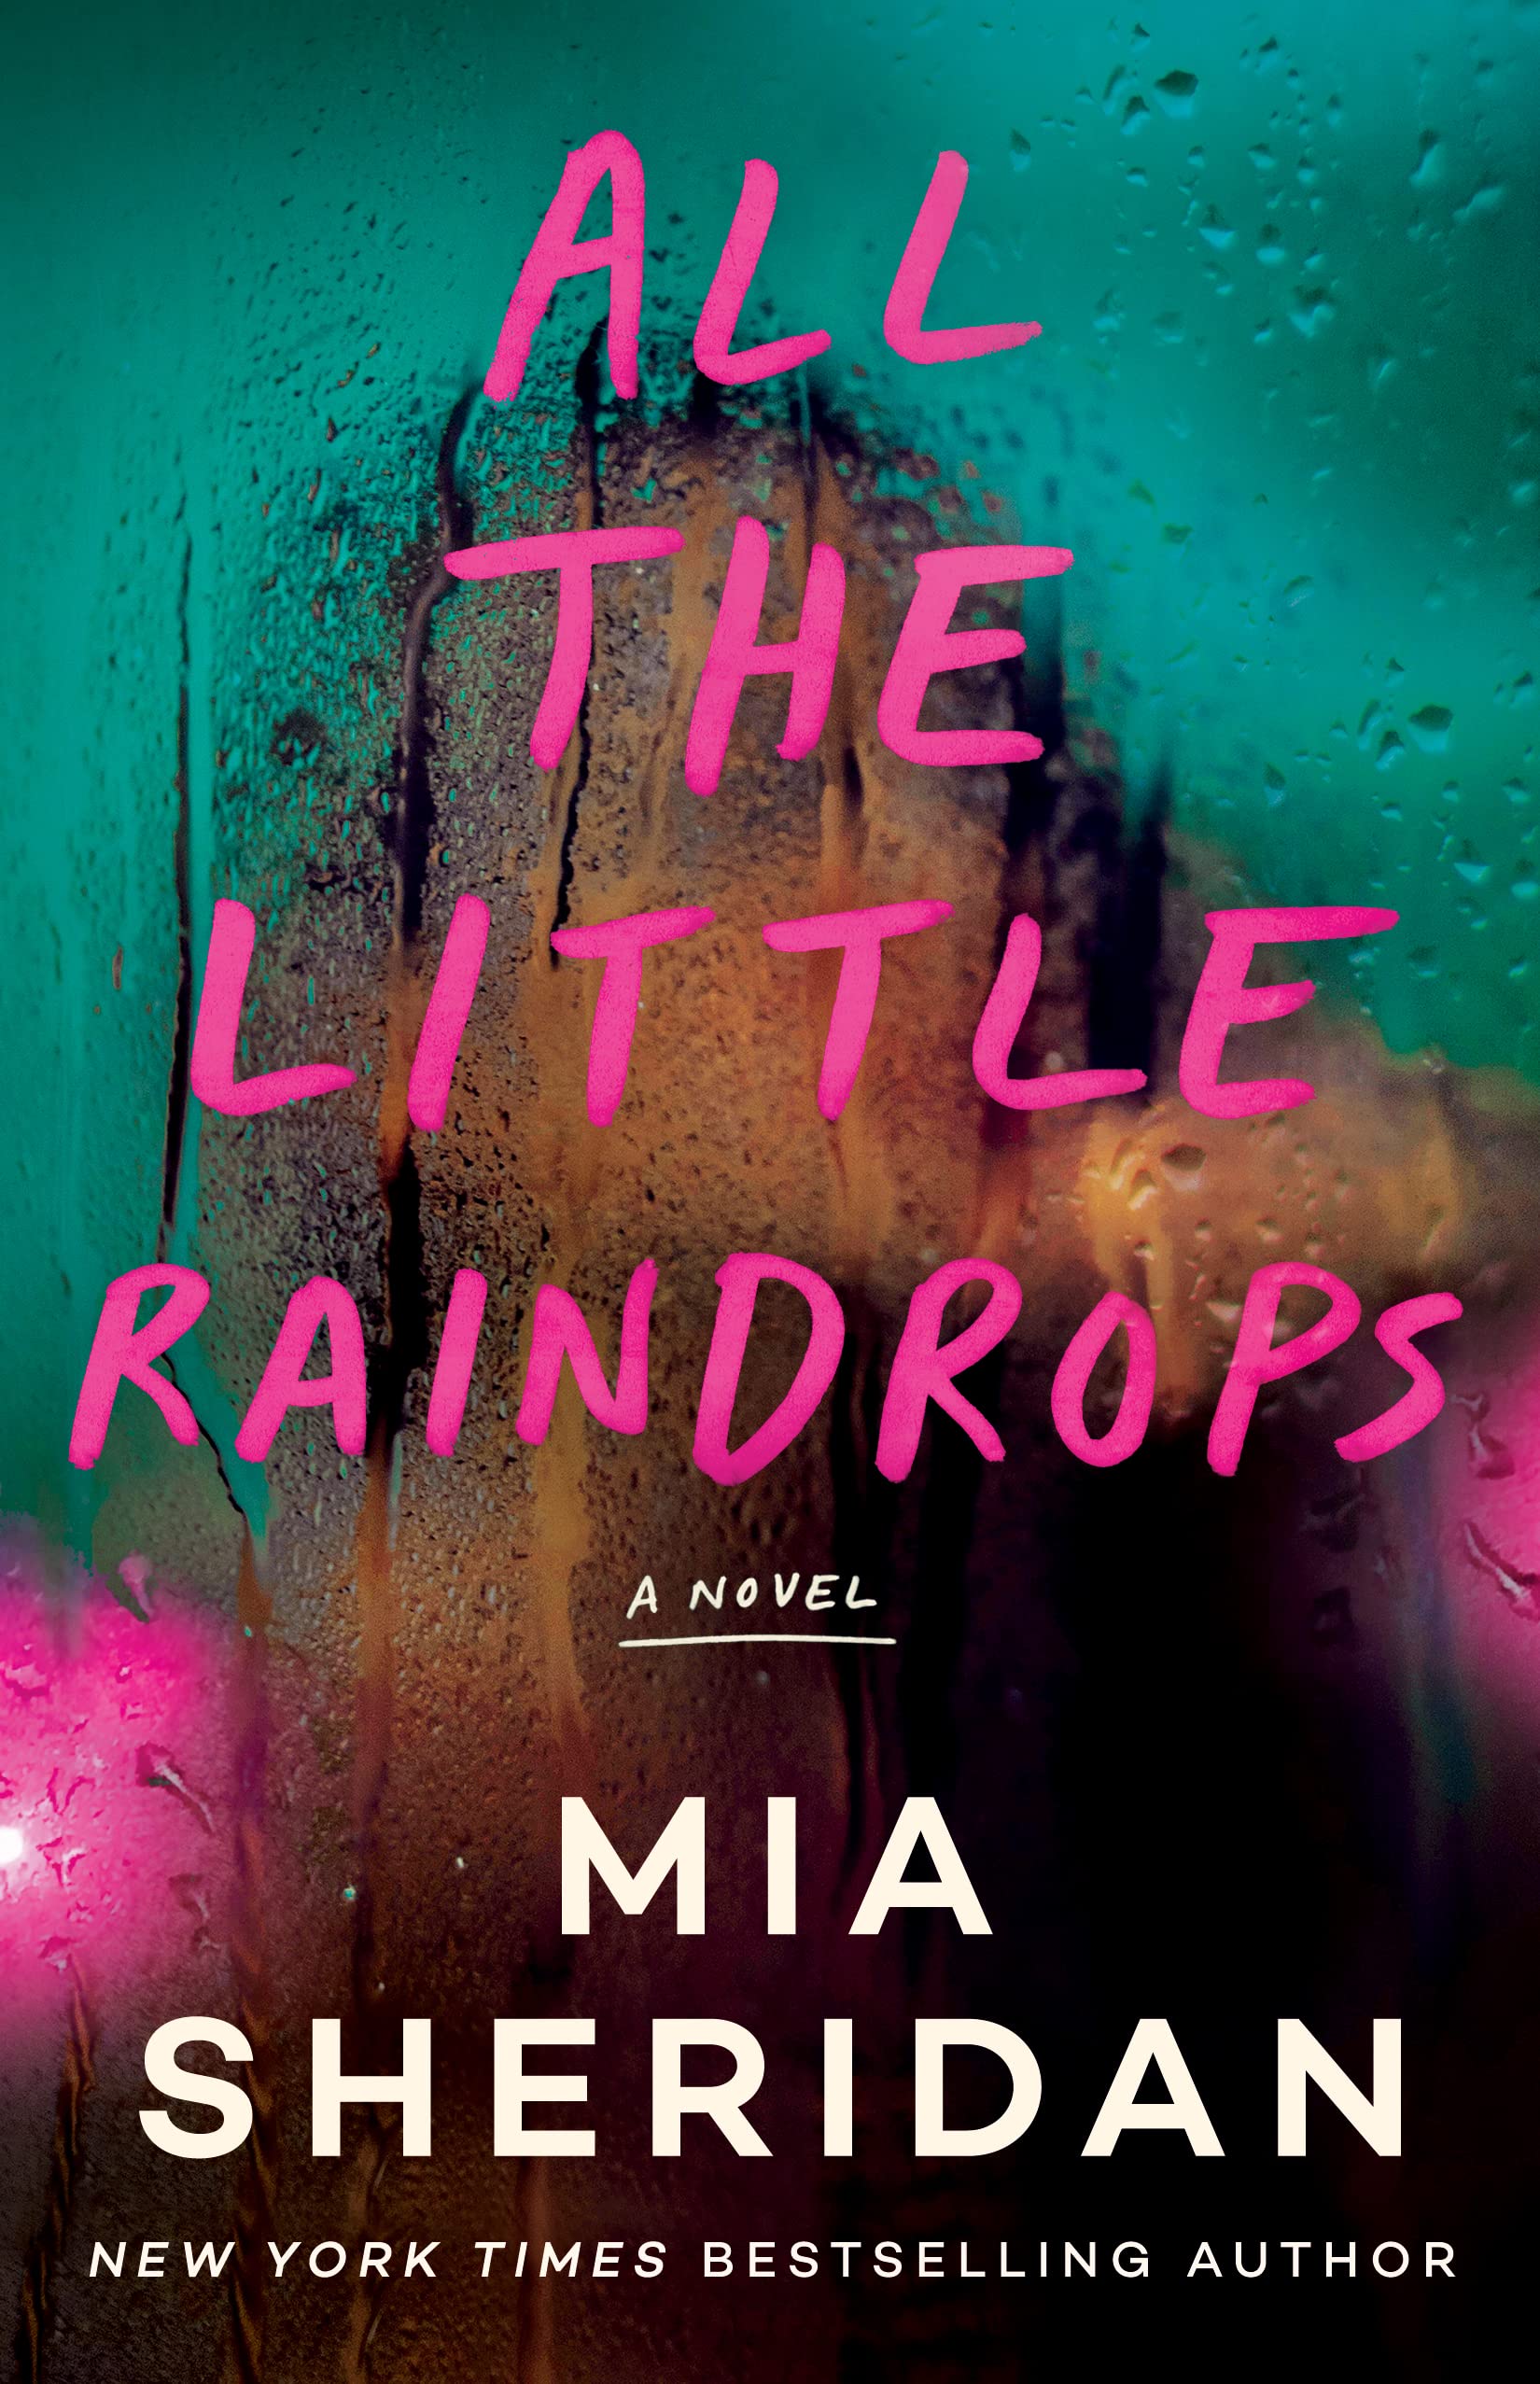 All the Little Raindrops by Sheridan, Mia